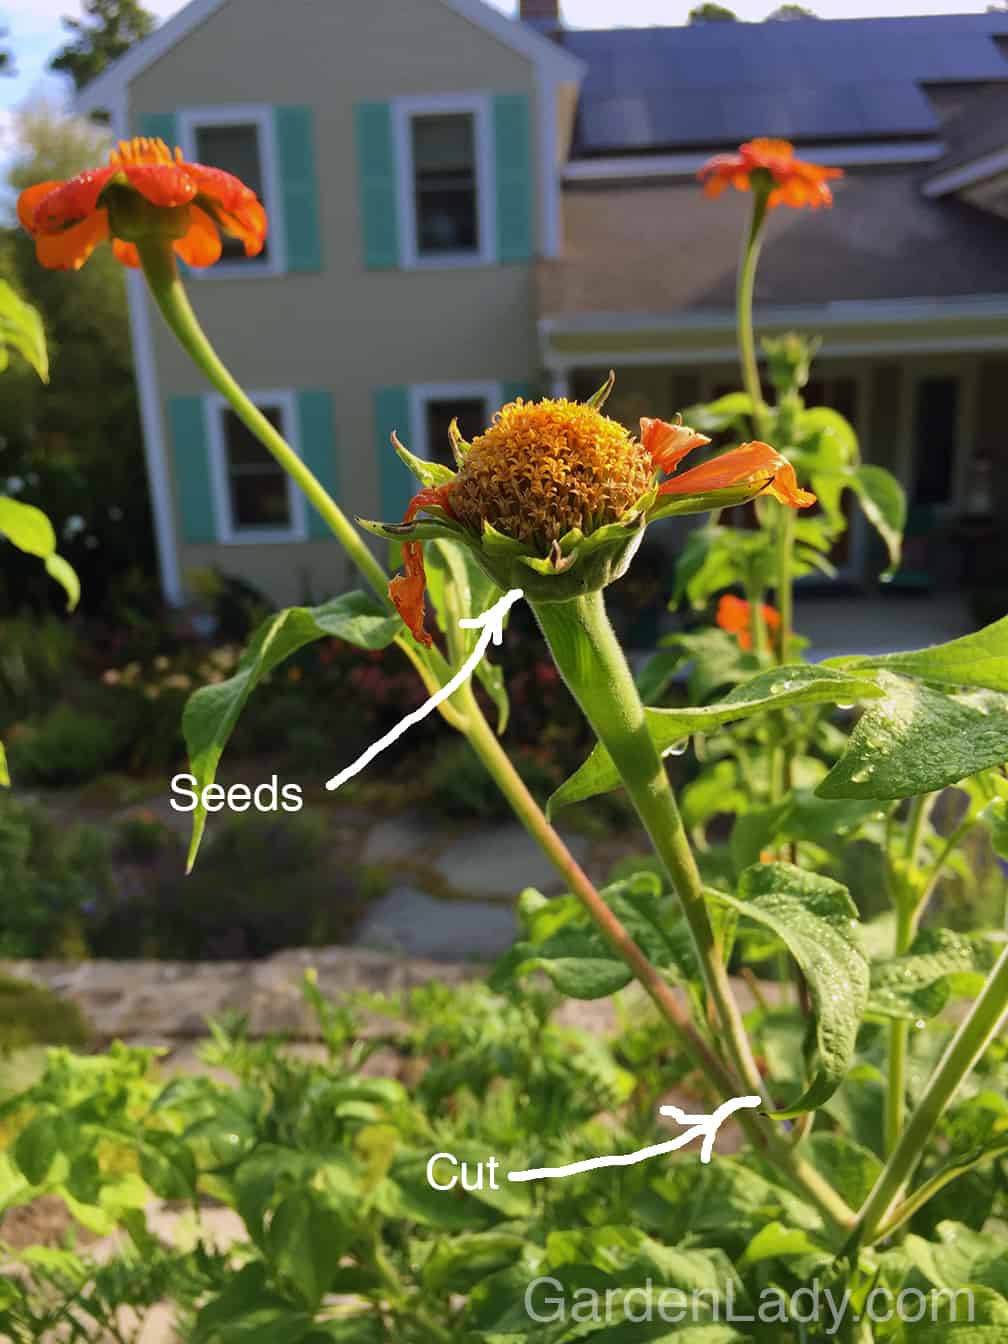 Annuals usually flower more with deadheading. This Mexican sunflower (Tithonia rotundifolia) will branch out and bloom more if old flowers and seeds are removed.